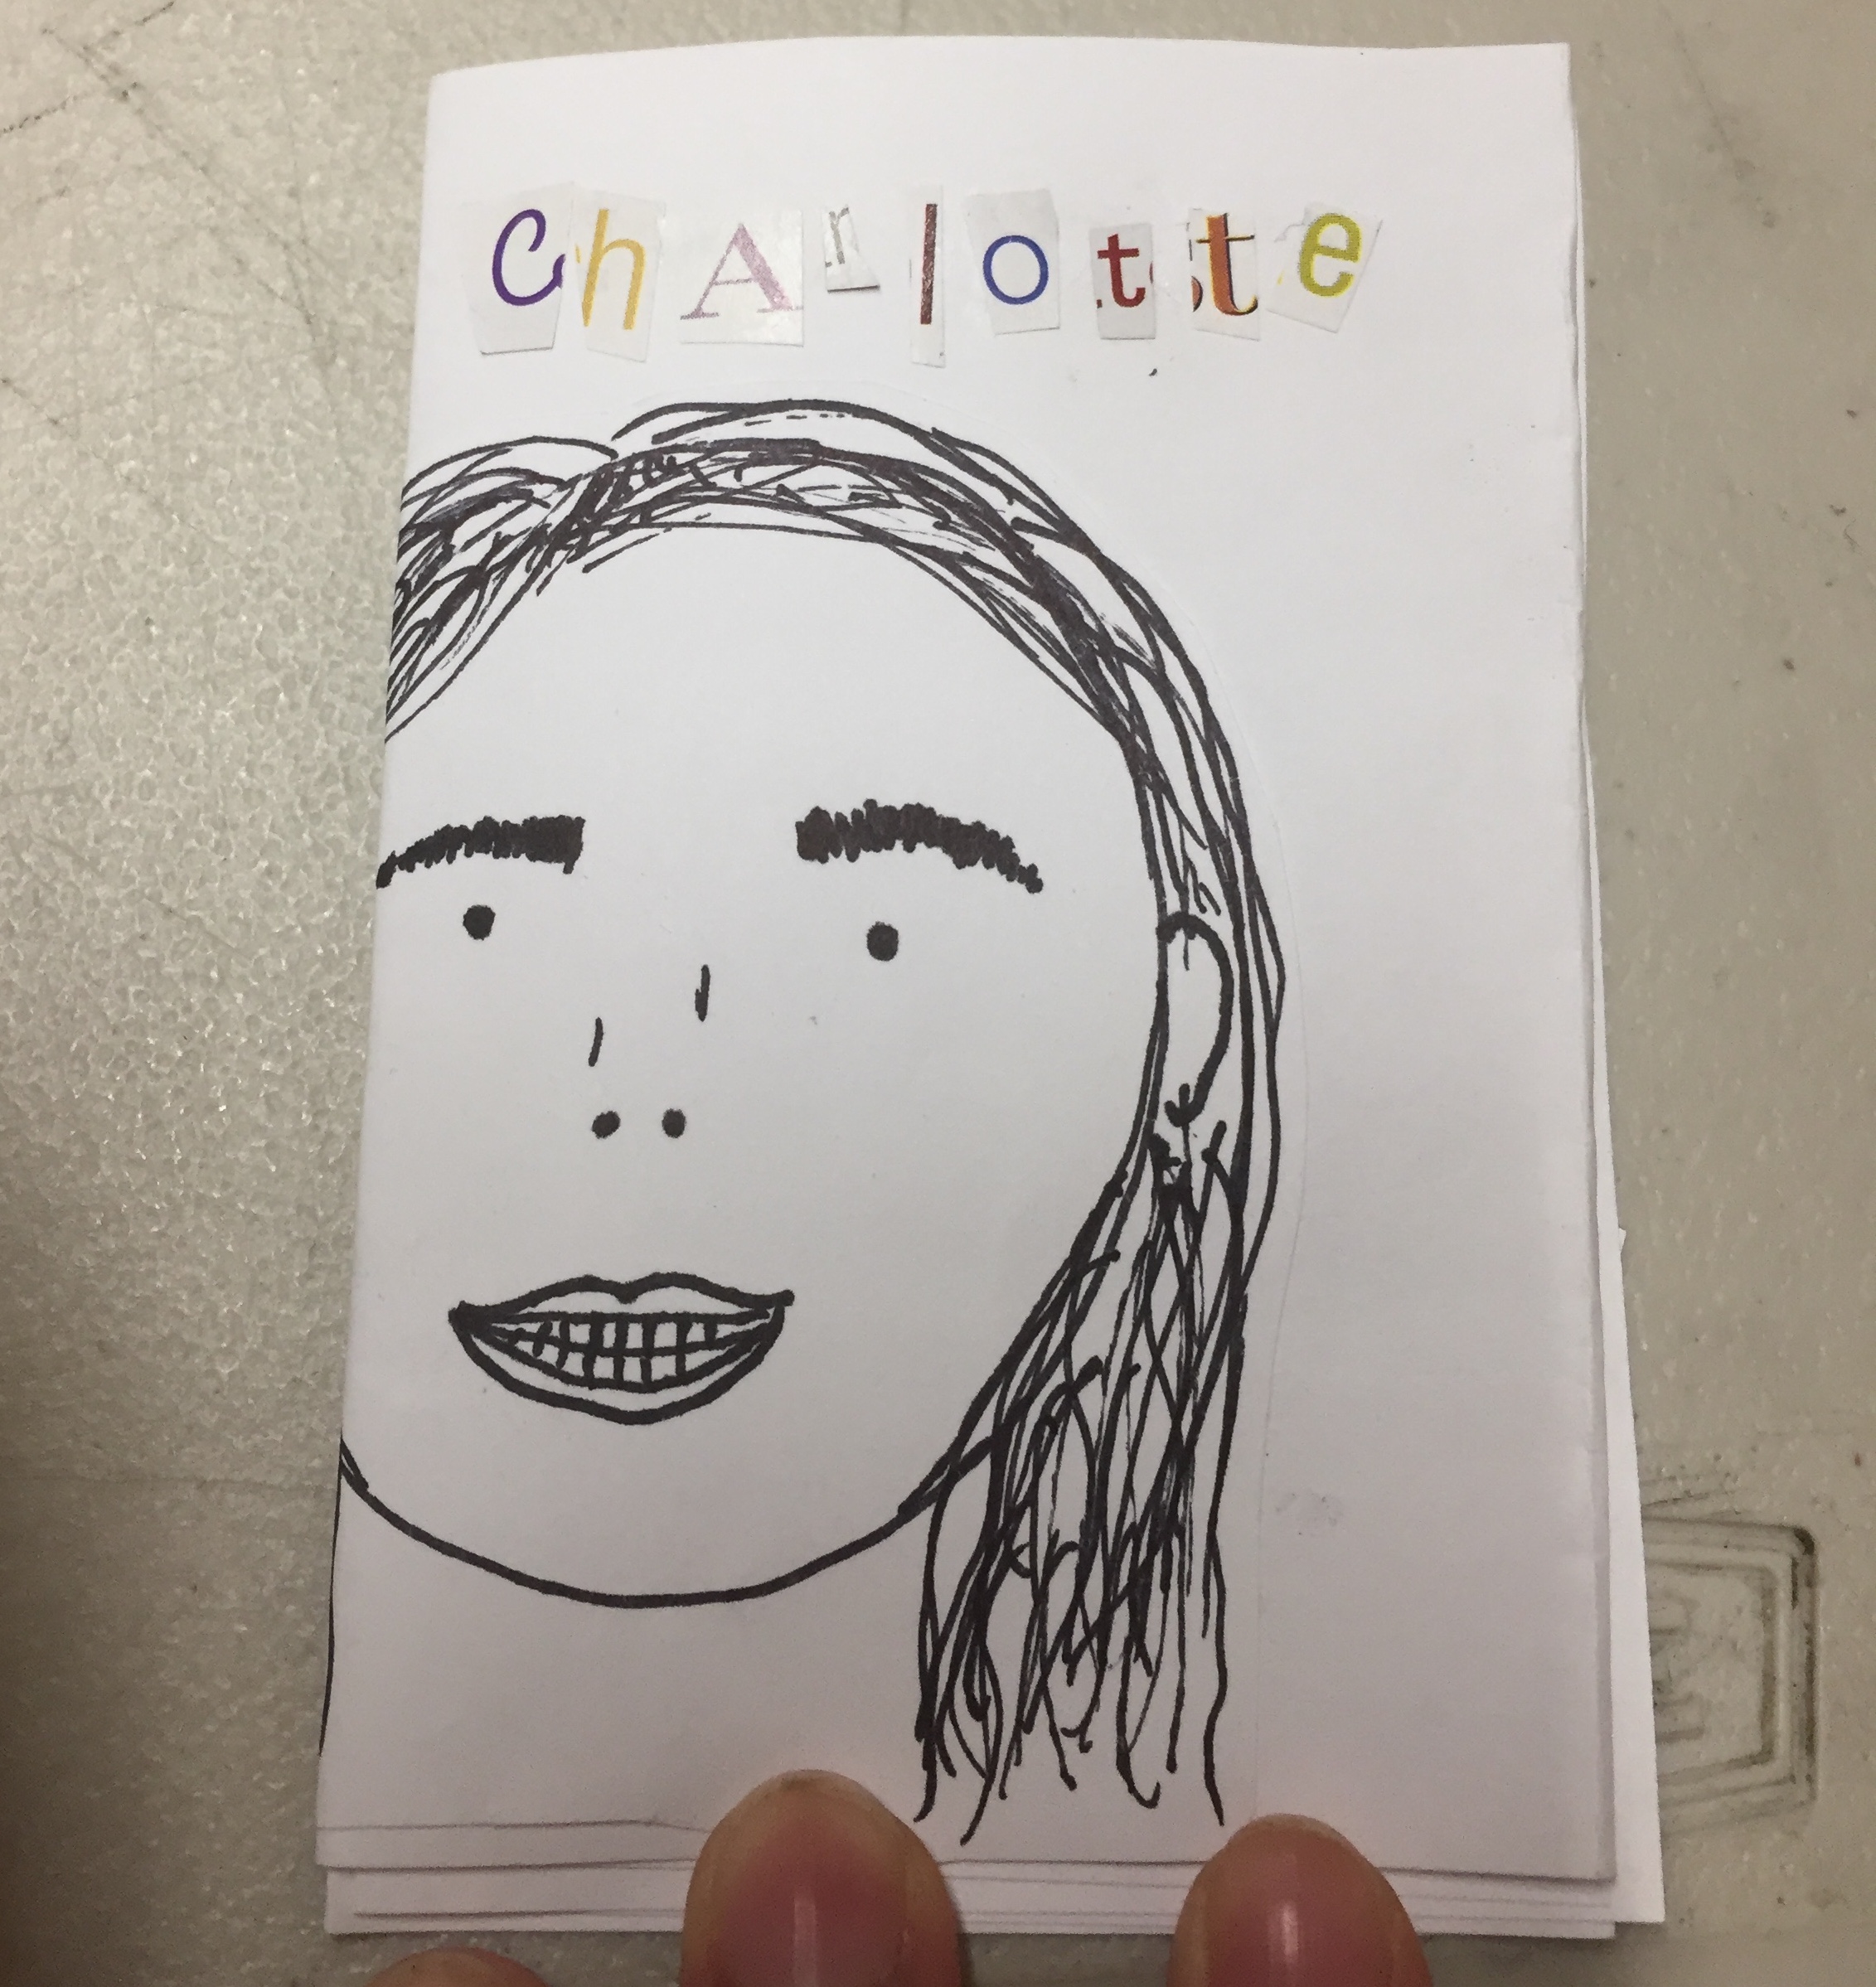 These are select images from students' zines made in-class, surrounding the topic of body image and what we like about ourselves.